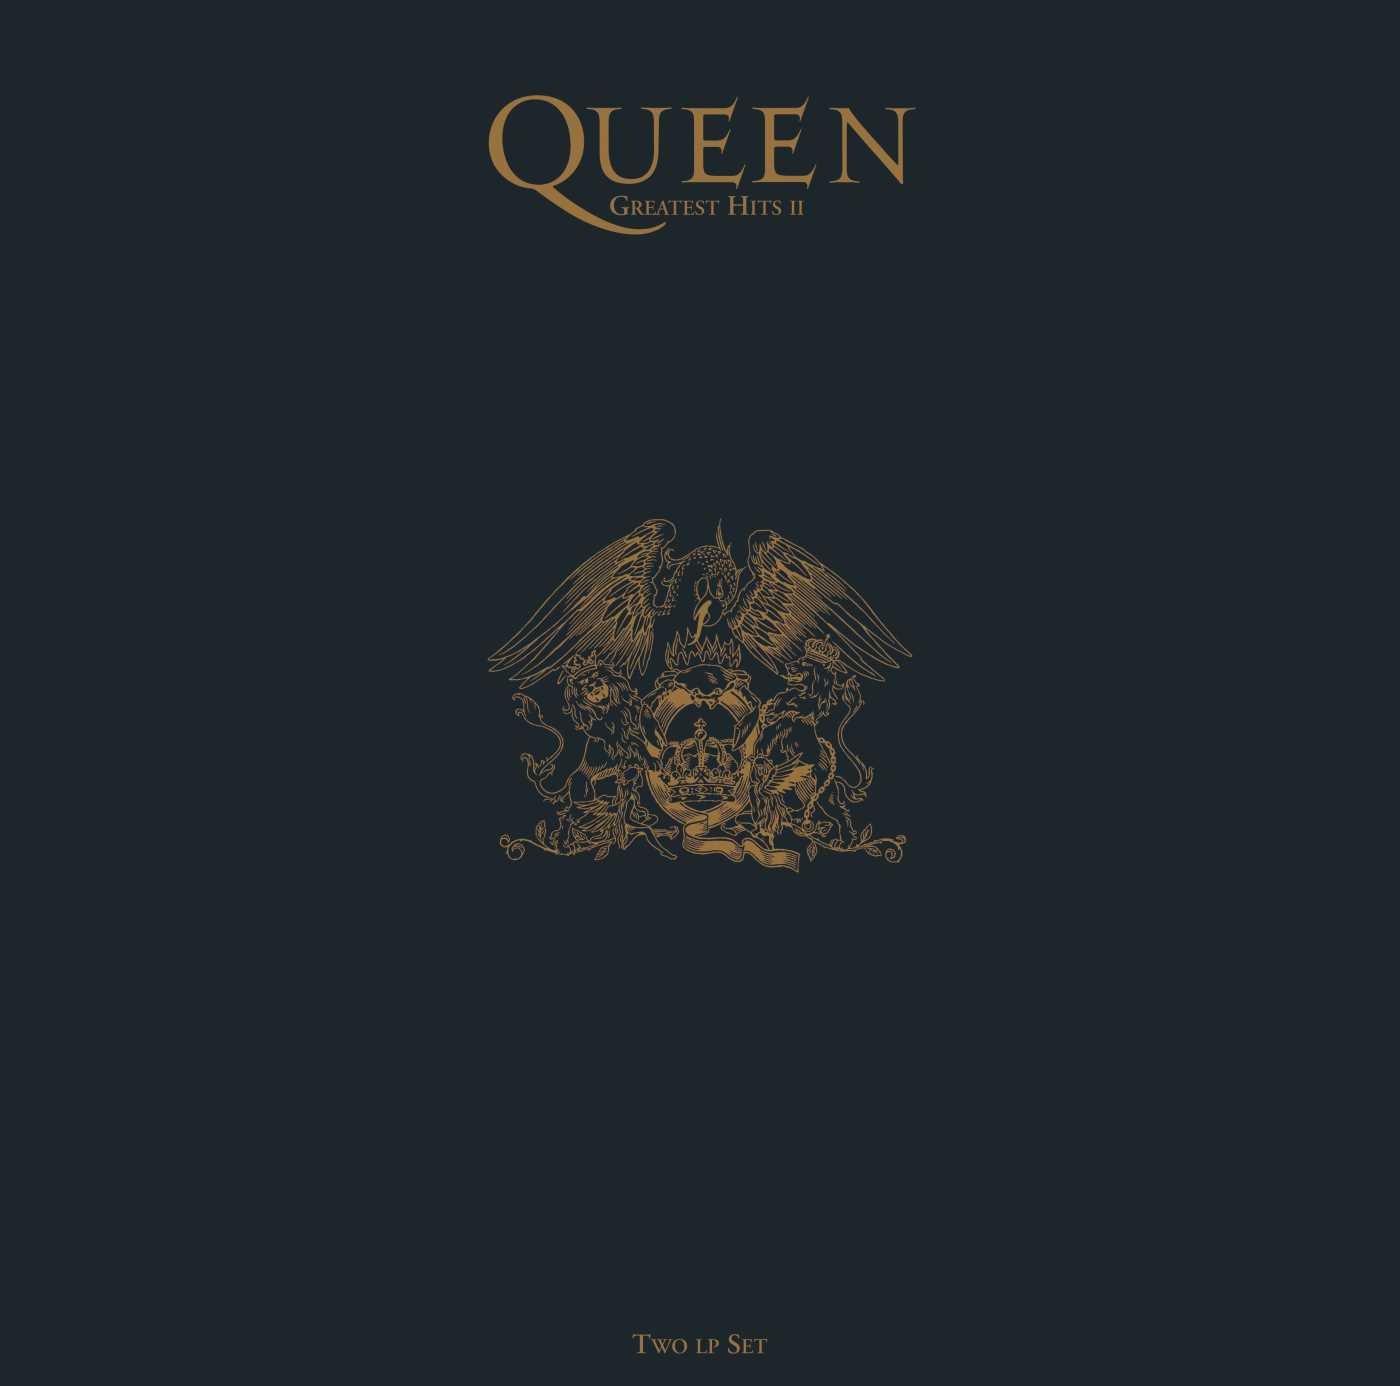 flac mix hits of queen